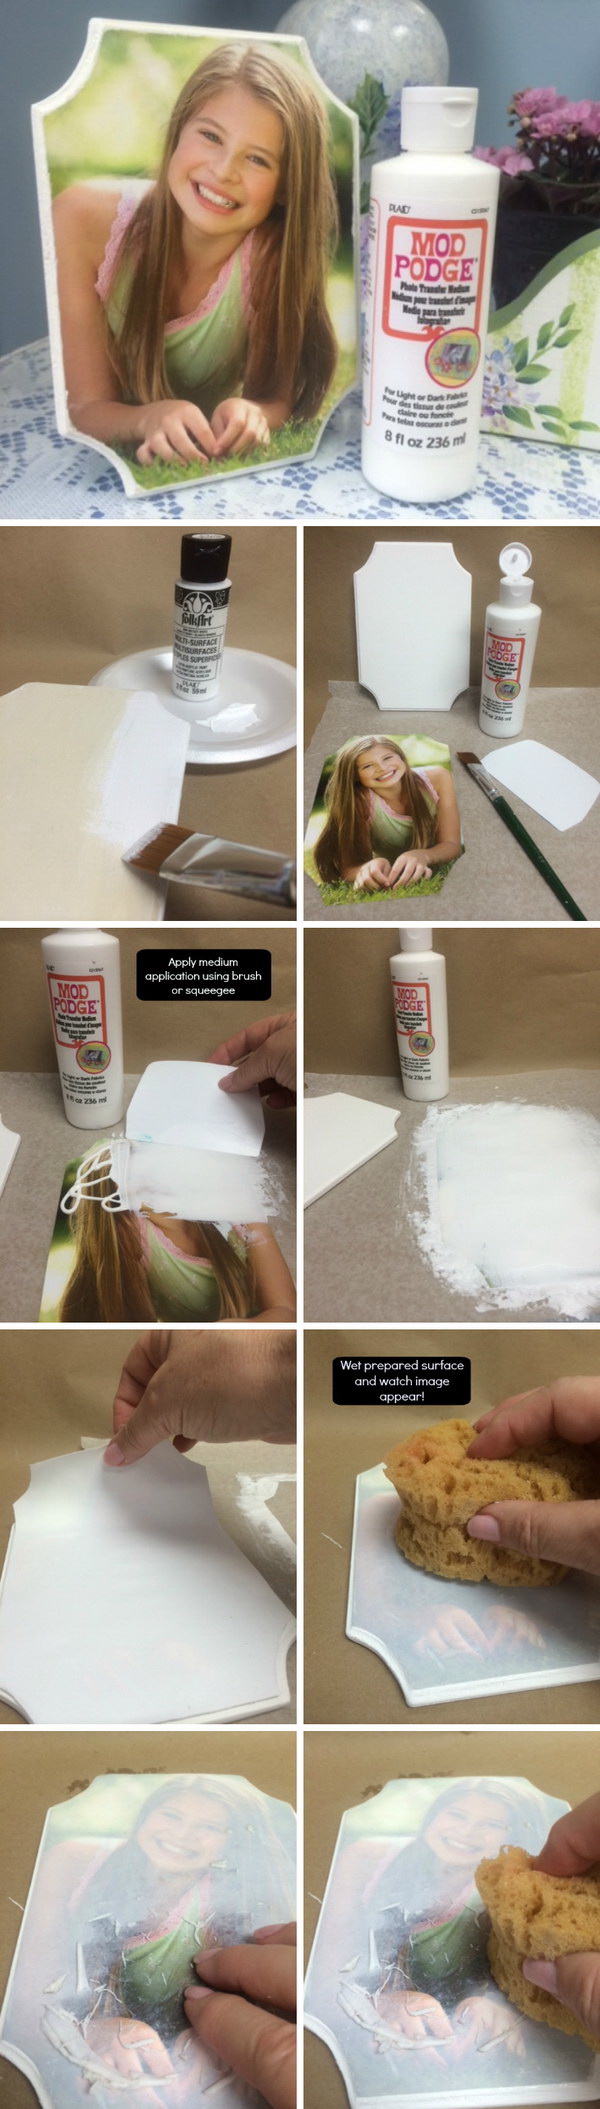 DIY Photo Project with Mod Podge Photo Transfer. 